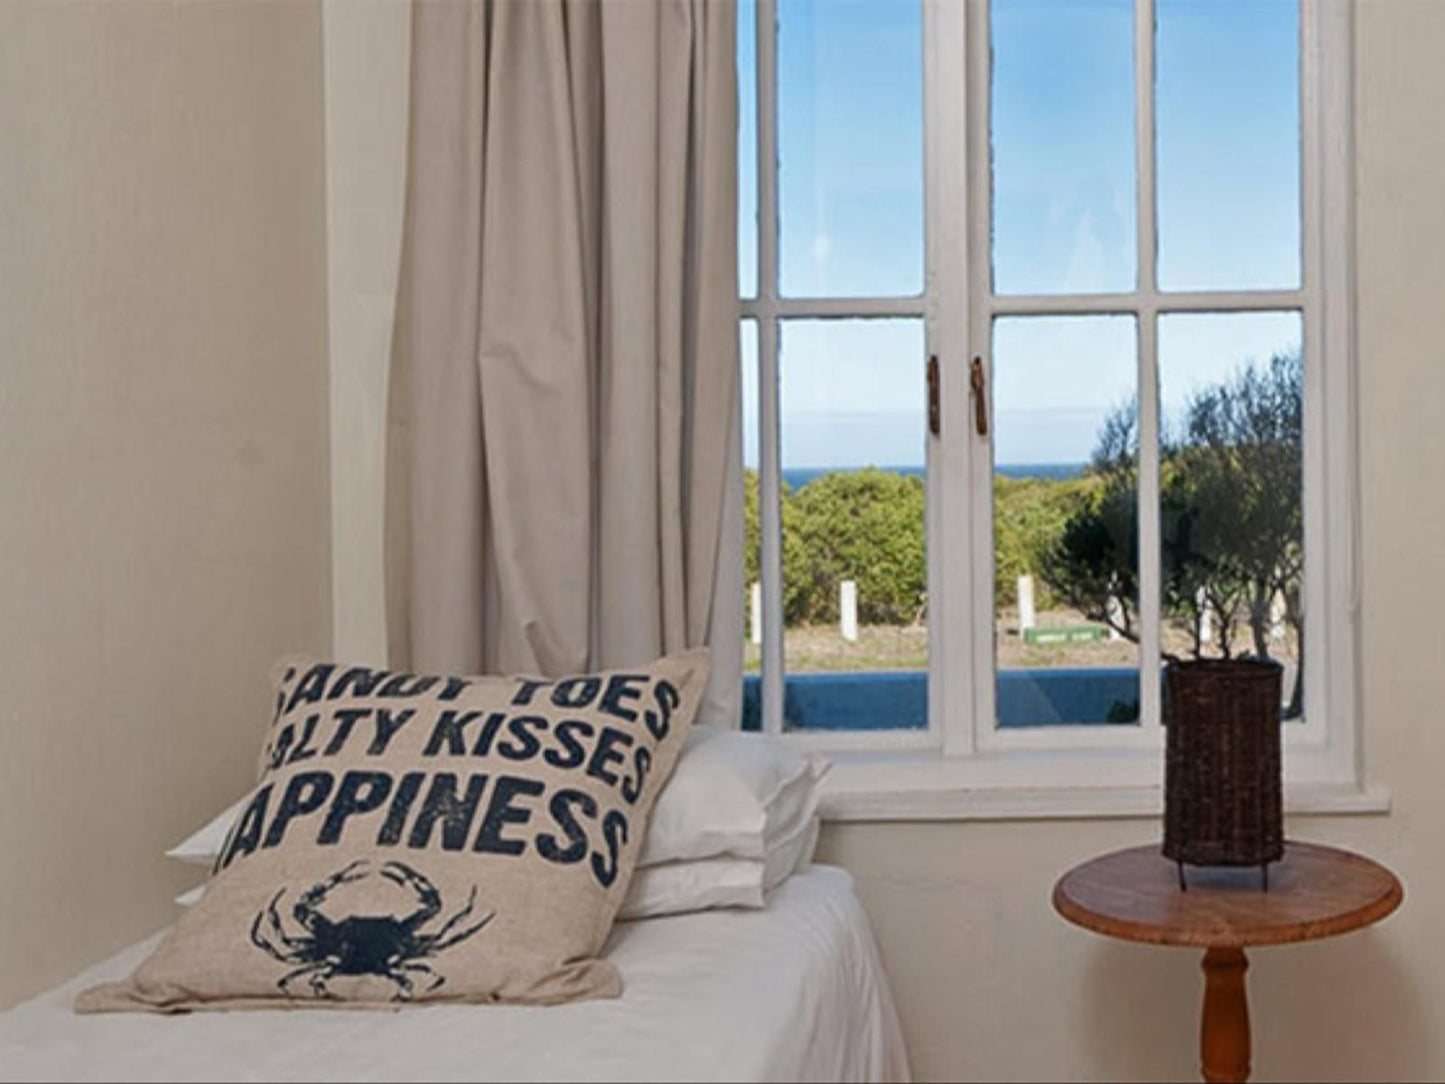 Pikkewyntjie Cottage Vermont Za Hermanus Western Cape South Africa Window, Architecture, Bedroom